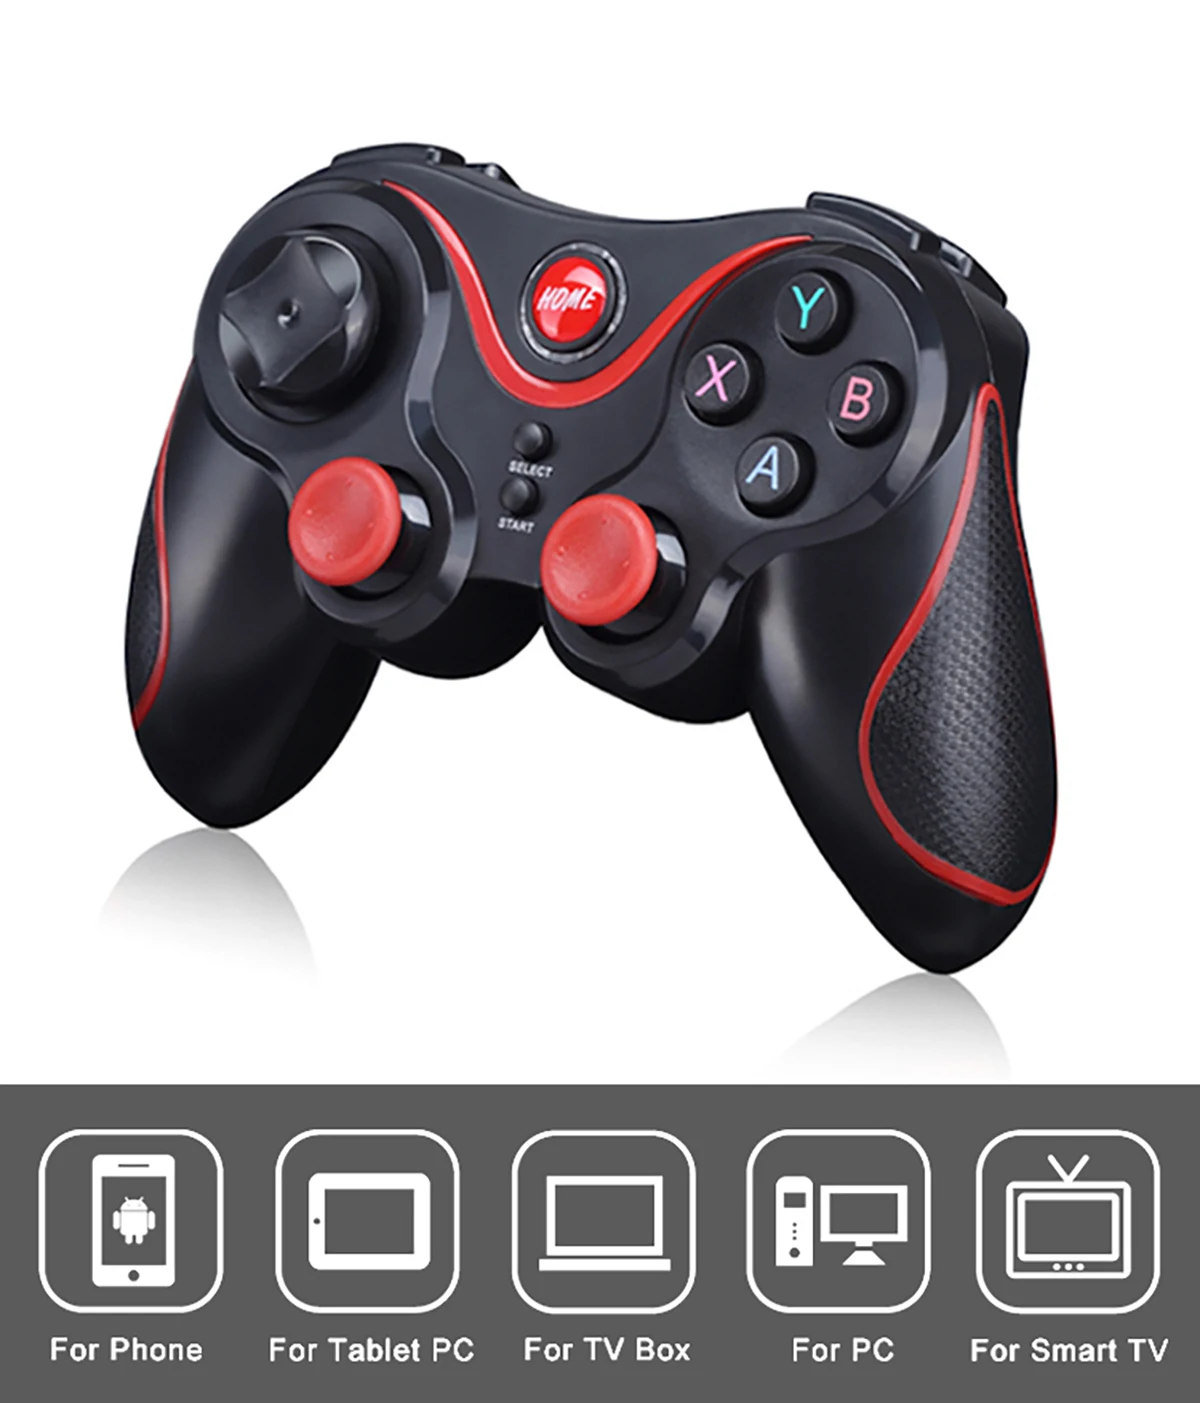 GAMINJA Wireless Bluetooth Gamepad PC Game Controller Gaming Joystick For Android Mobile Phone TV Box Playstation 3 Tablet PC 2